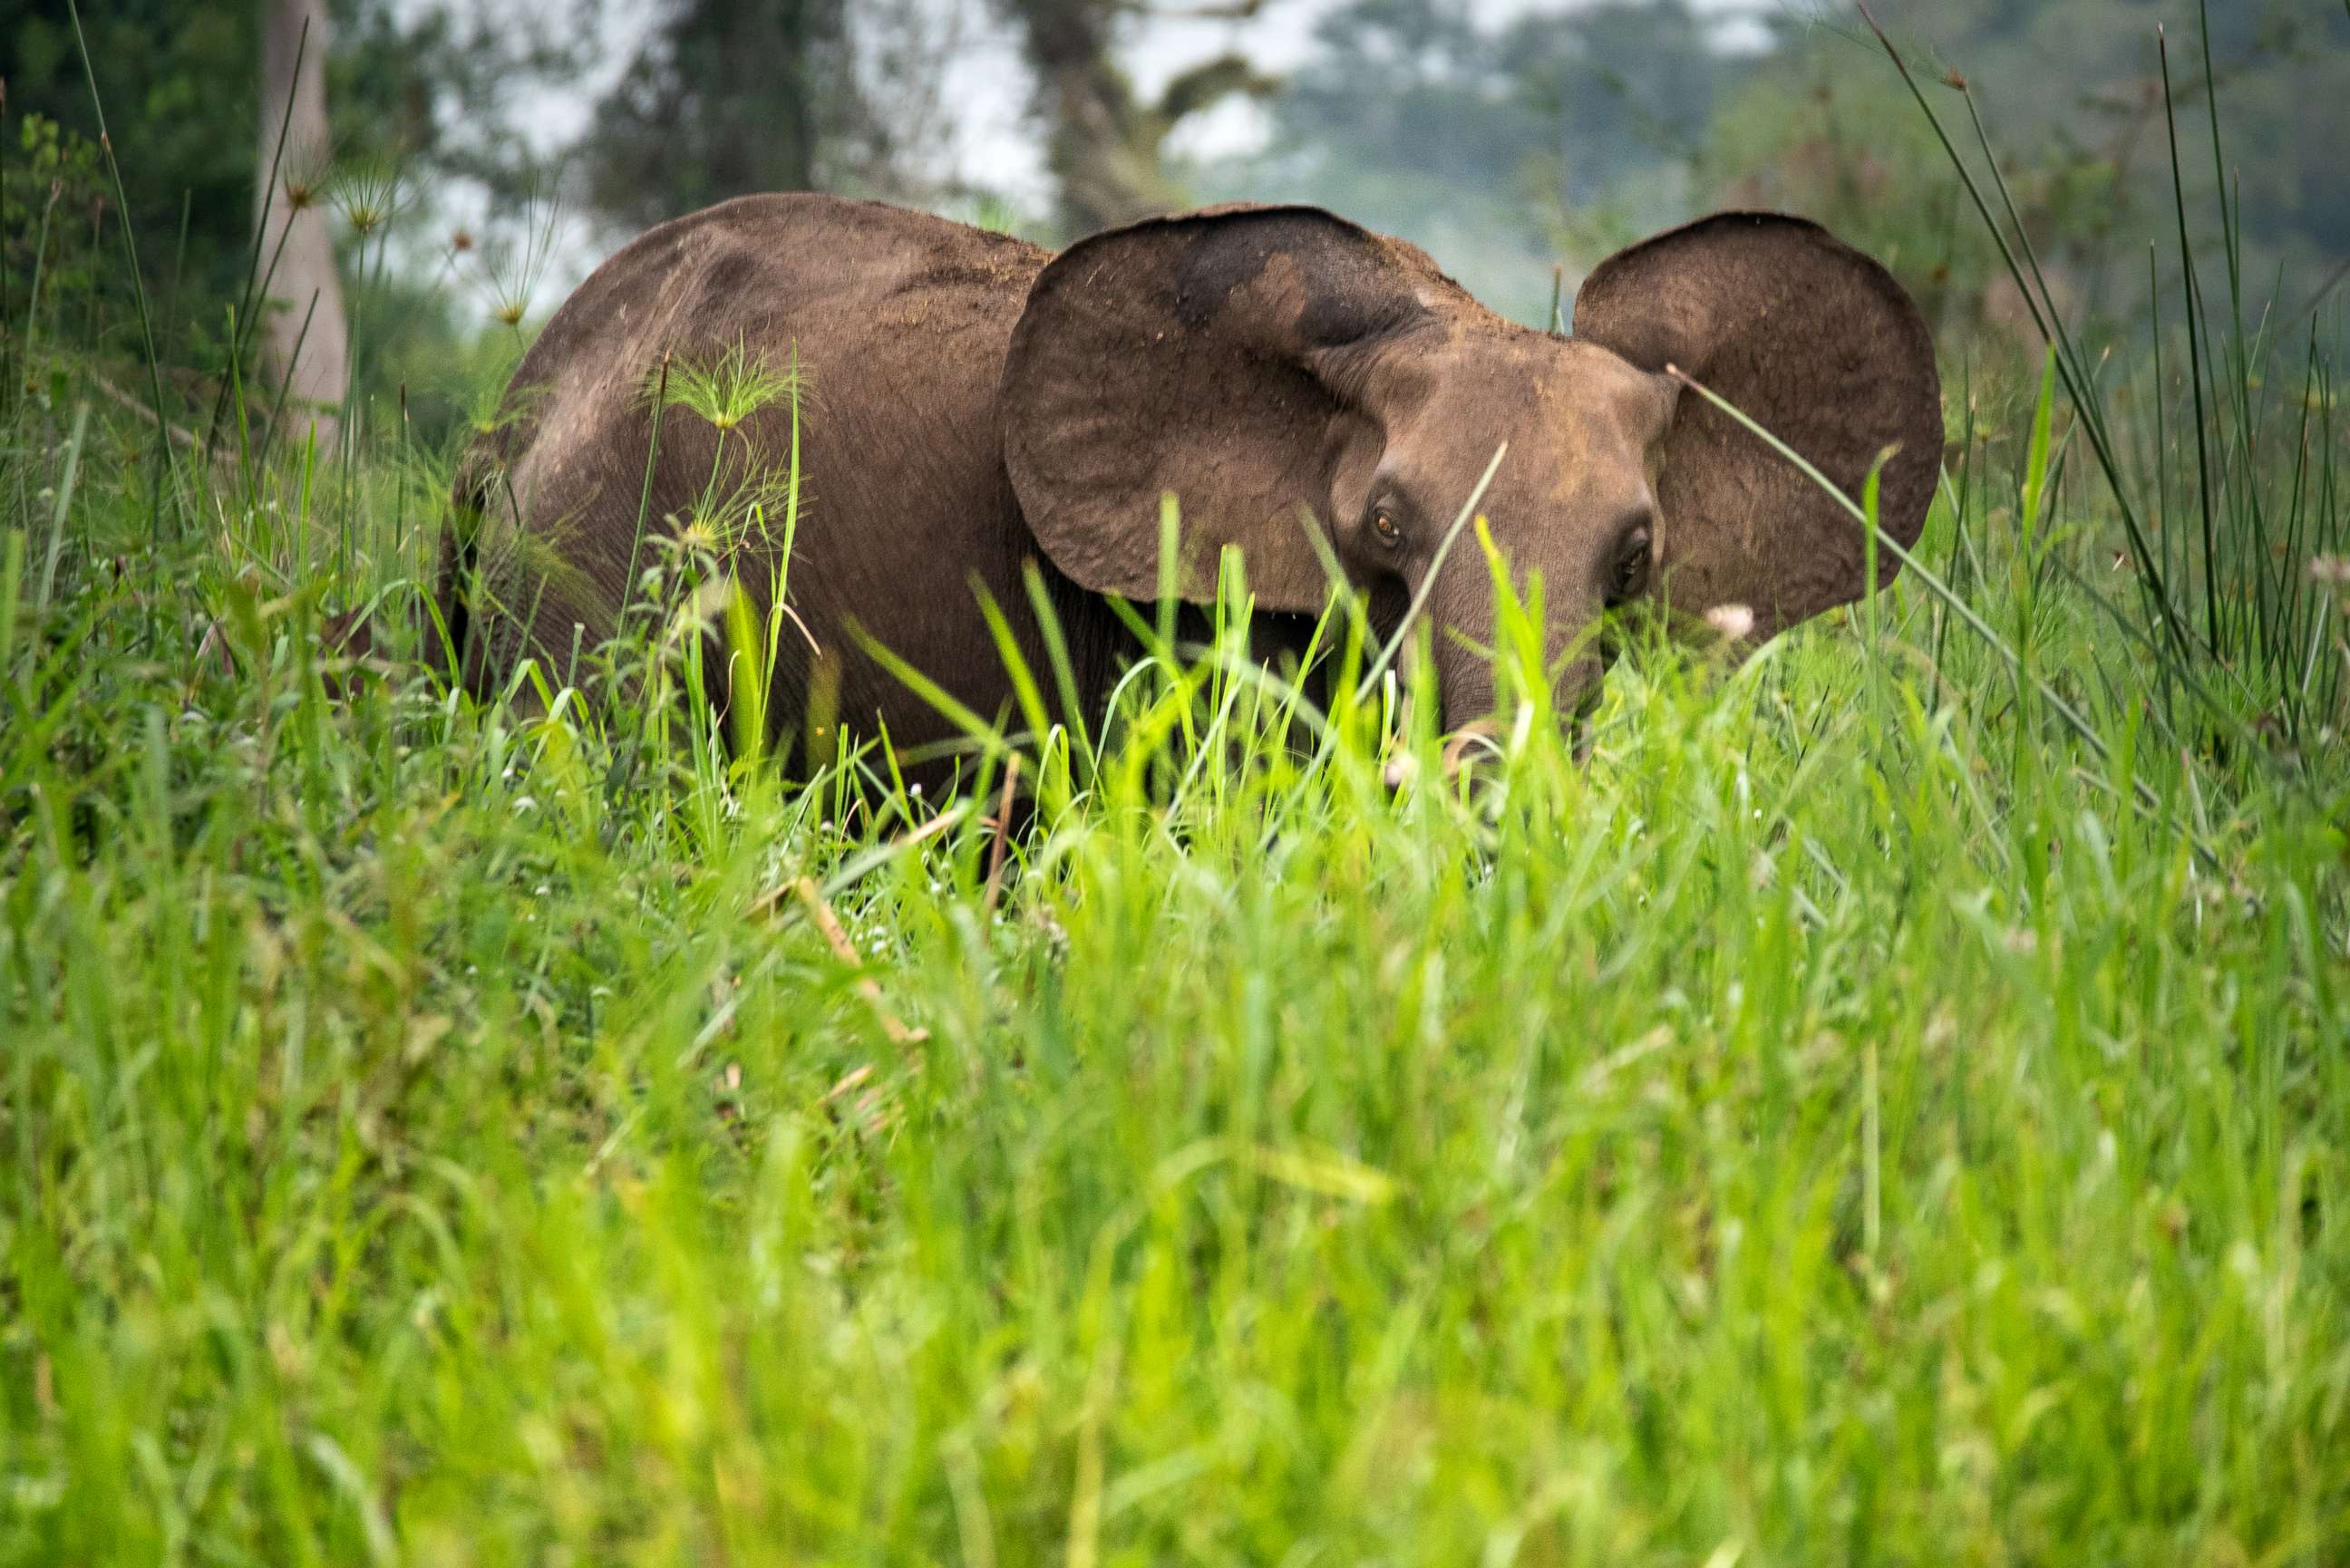 PHOTO: An African forest elephant is seen in this stock photo.